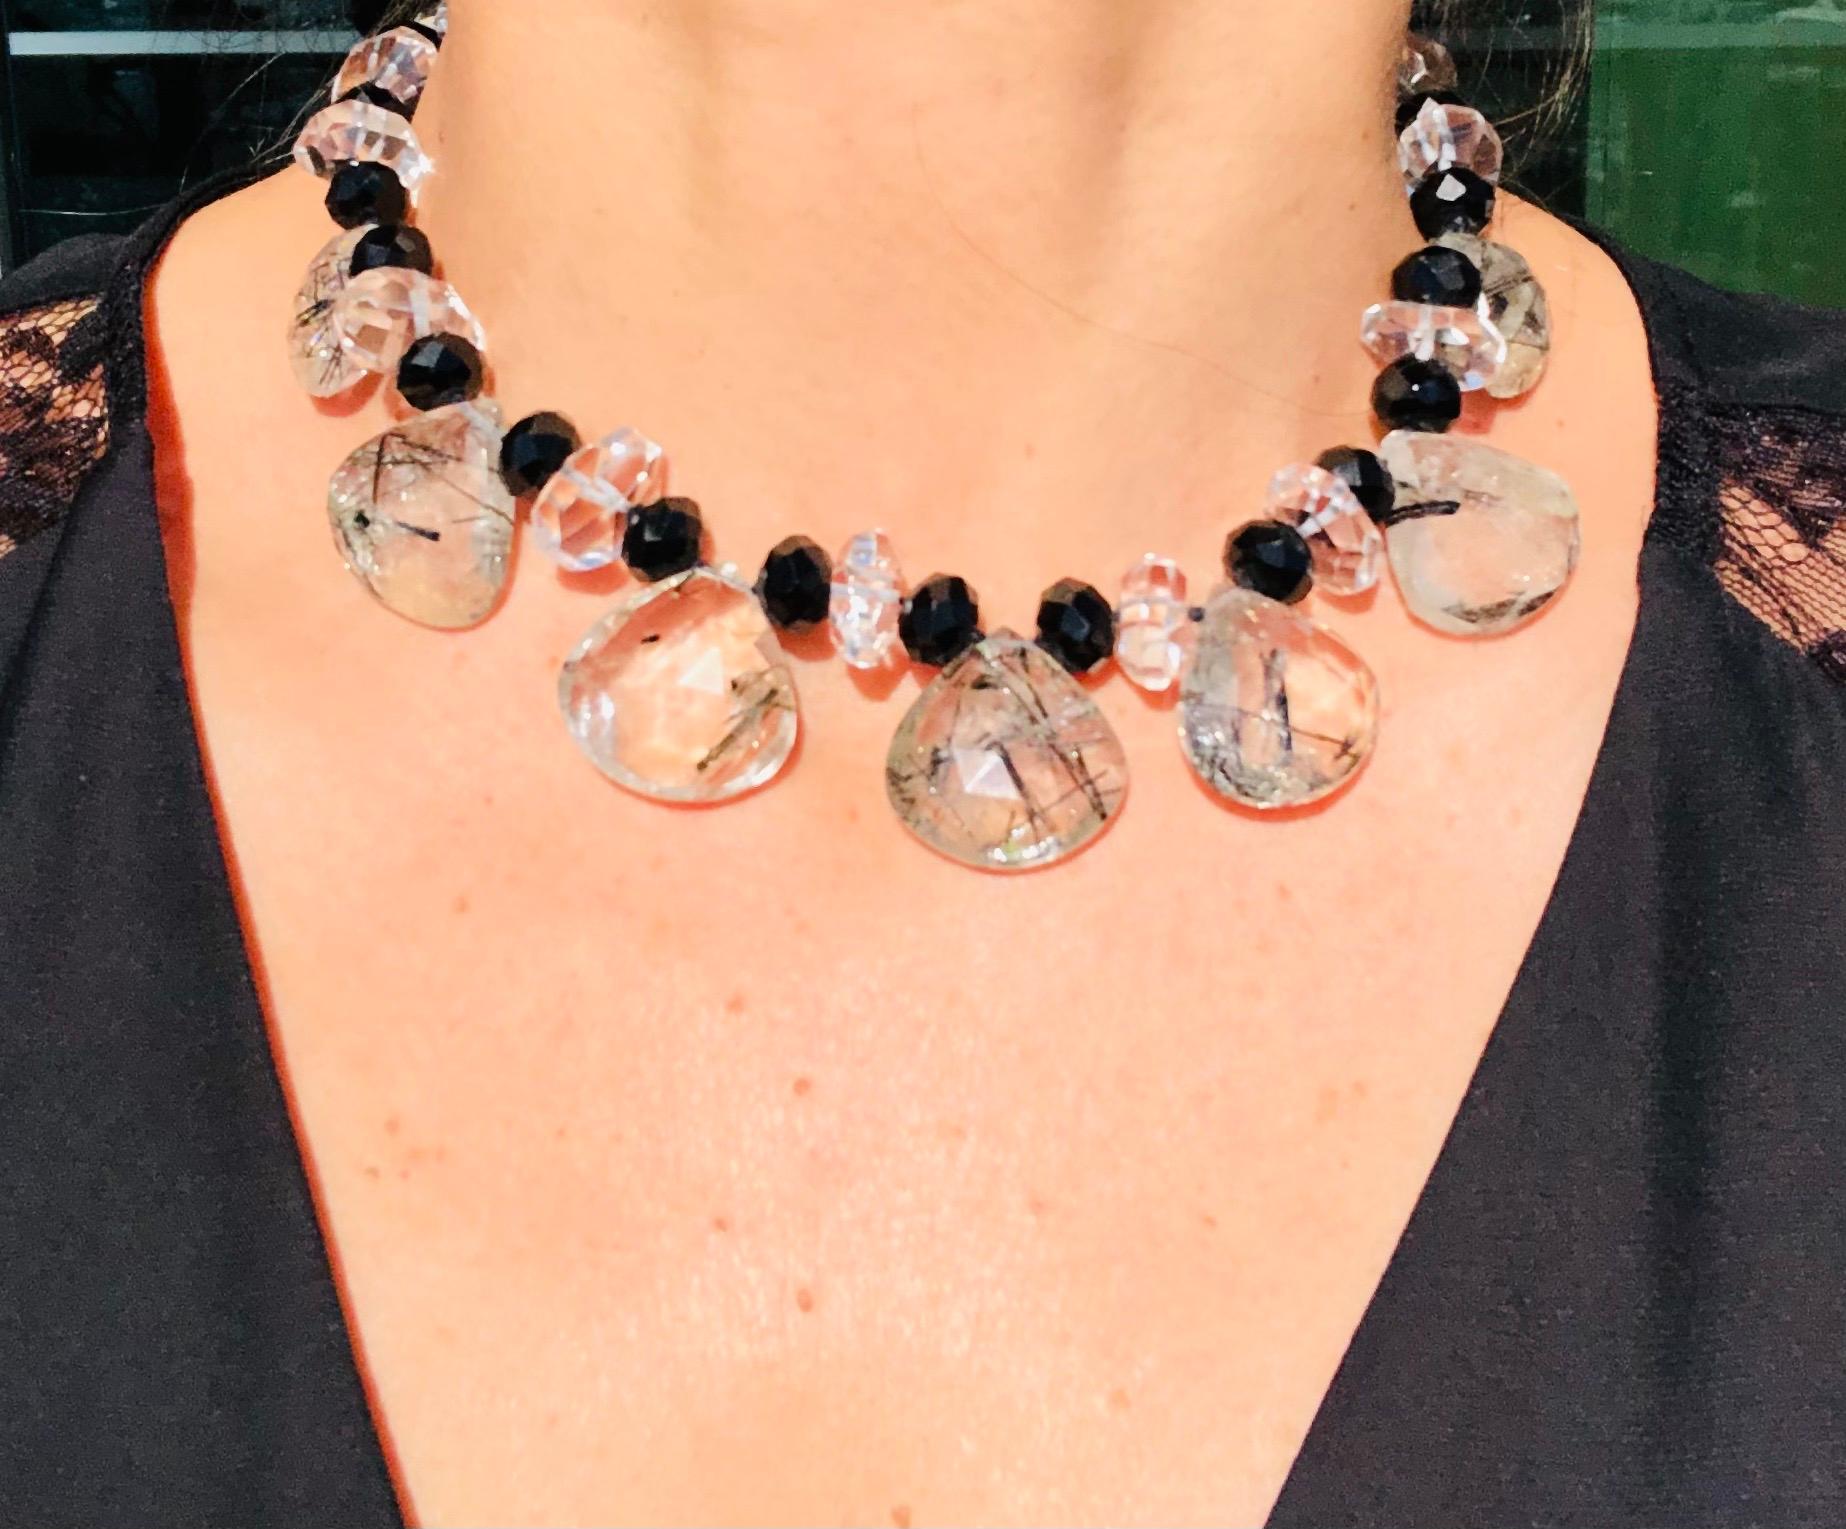 One-of-a-Kind
Black cut Onyx beads and teardrop rutilated Quartz team in perfect harmony.
Beautifully cut stones in a 16” choker. A necklace that fits perfectly inside a collar and doesn’t skip down and become invisible. Clasped with a Swarovski